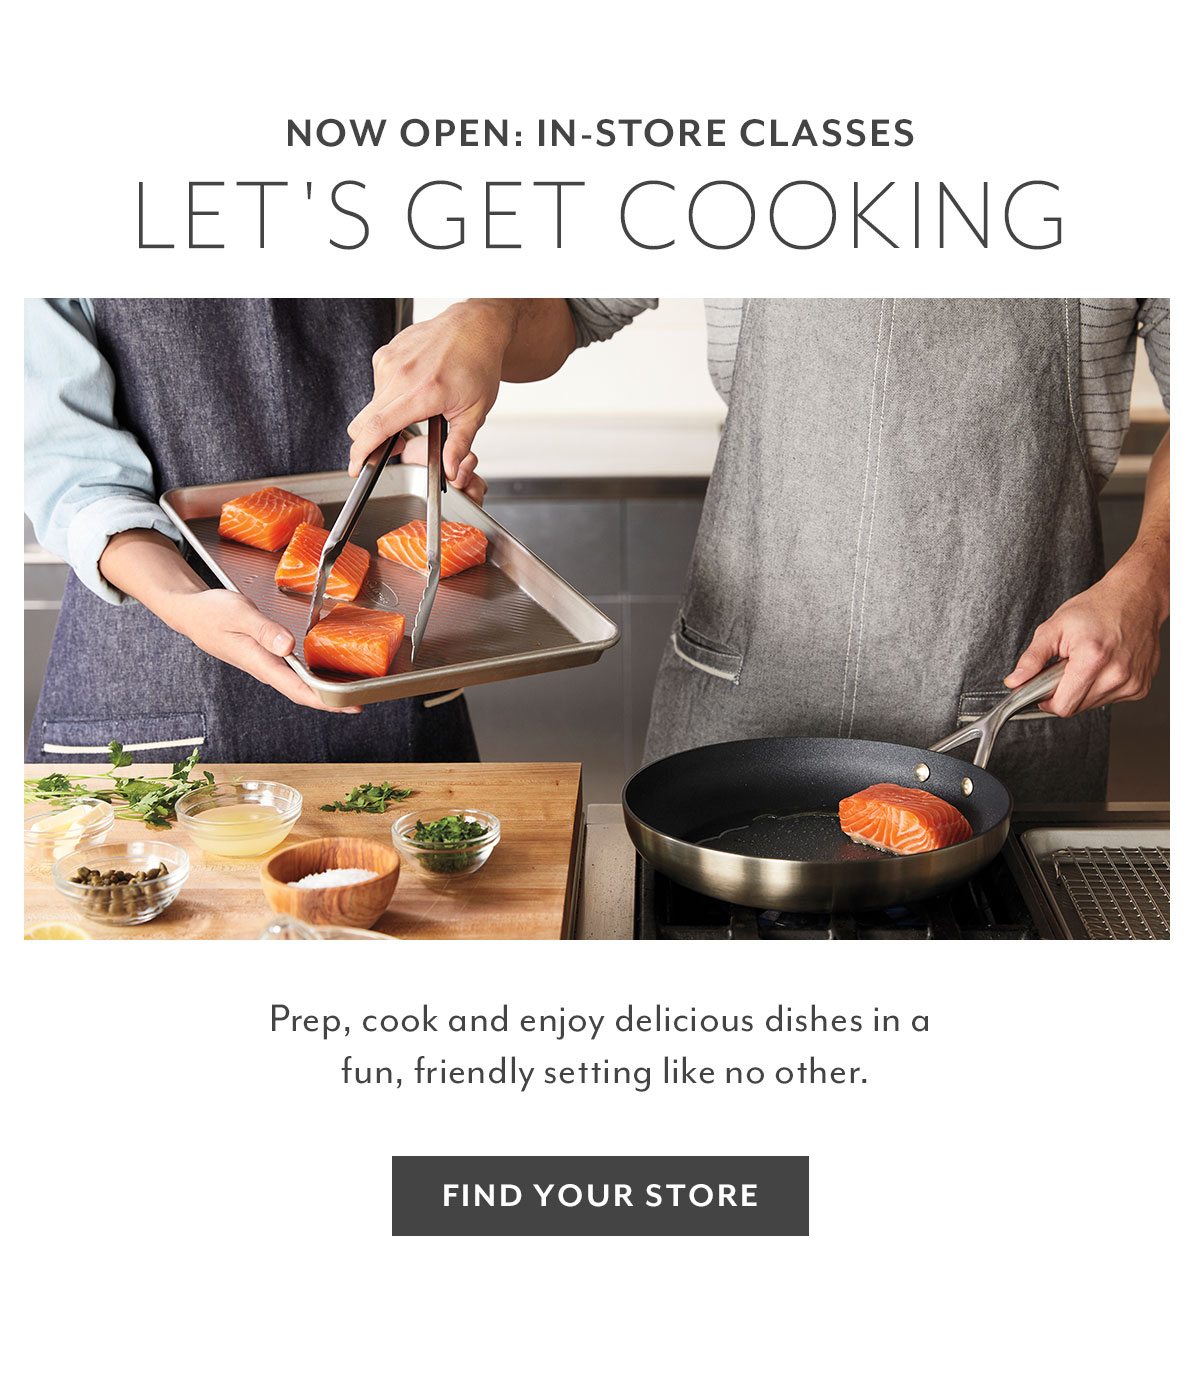 In-Store Classes with Dining